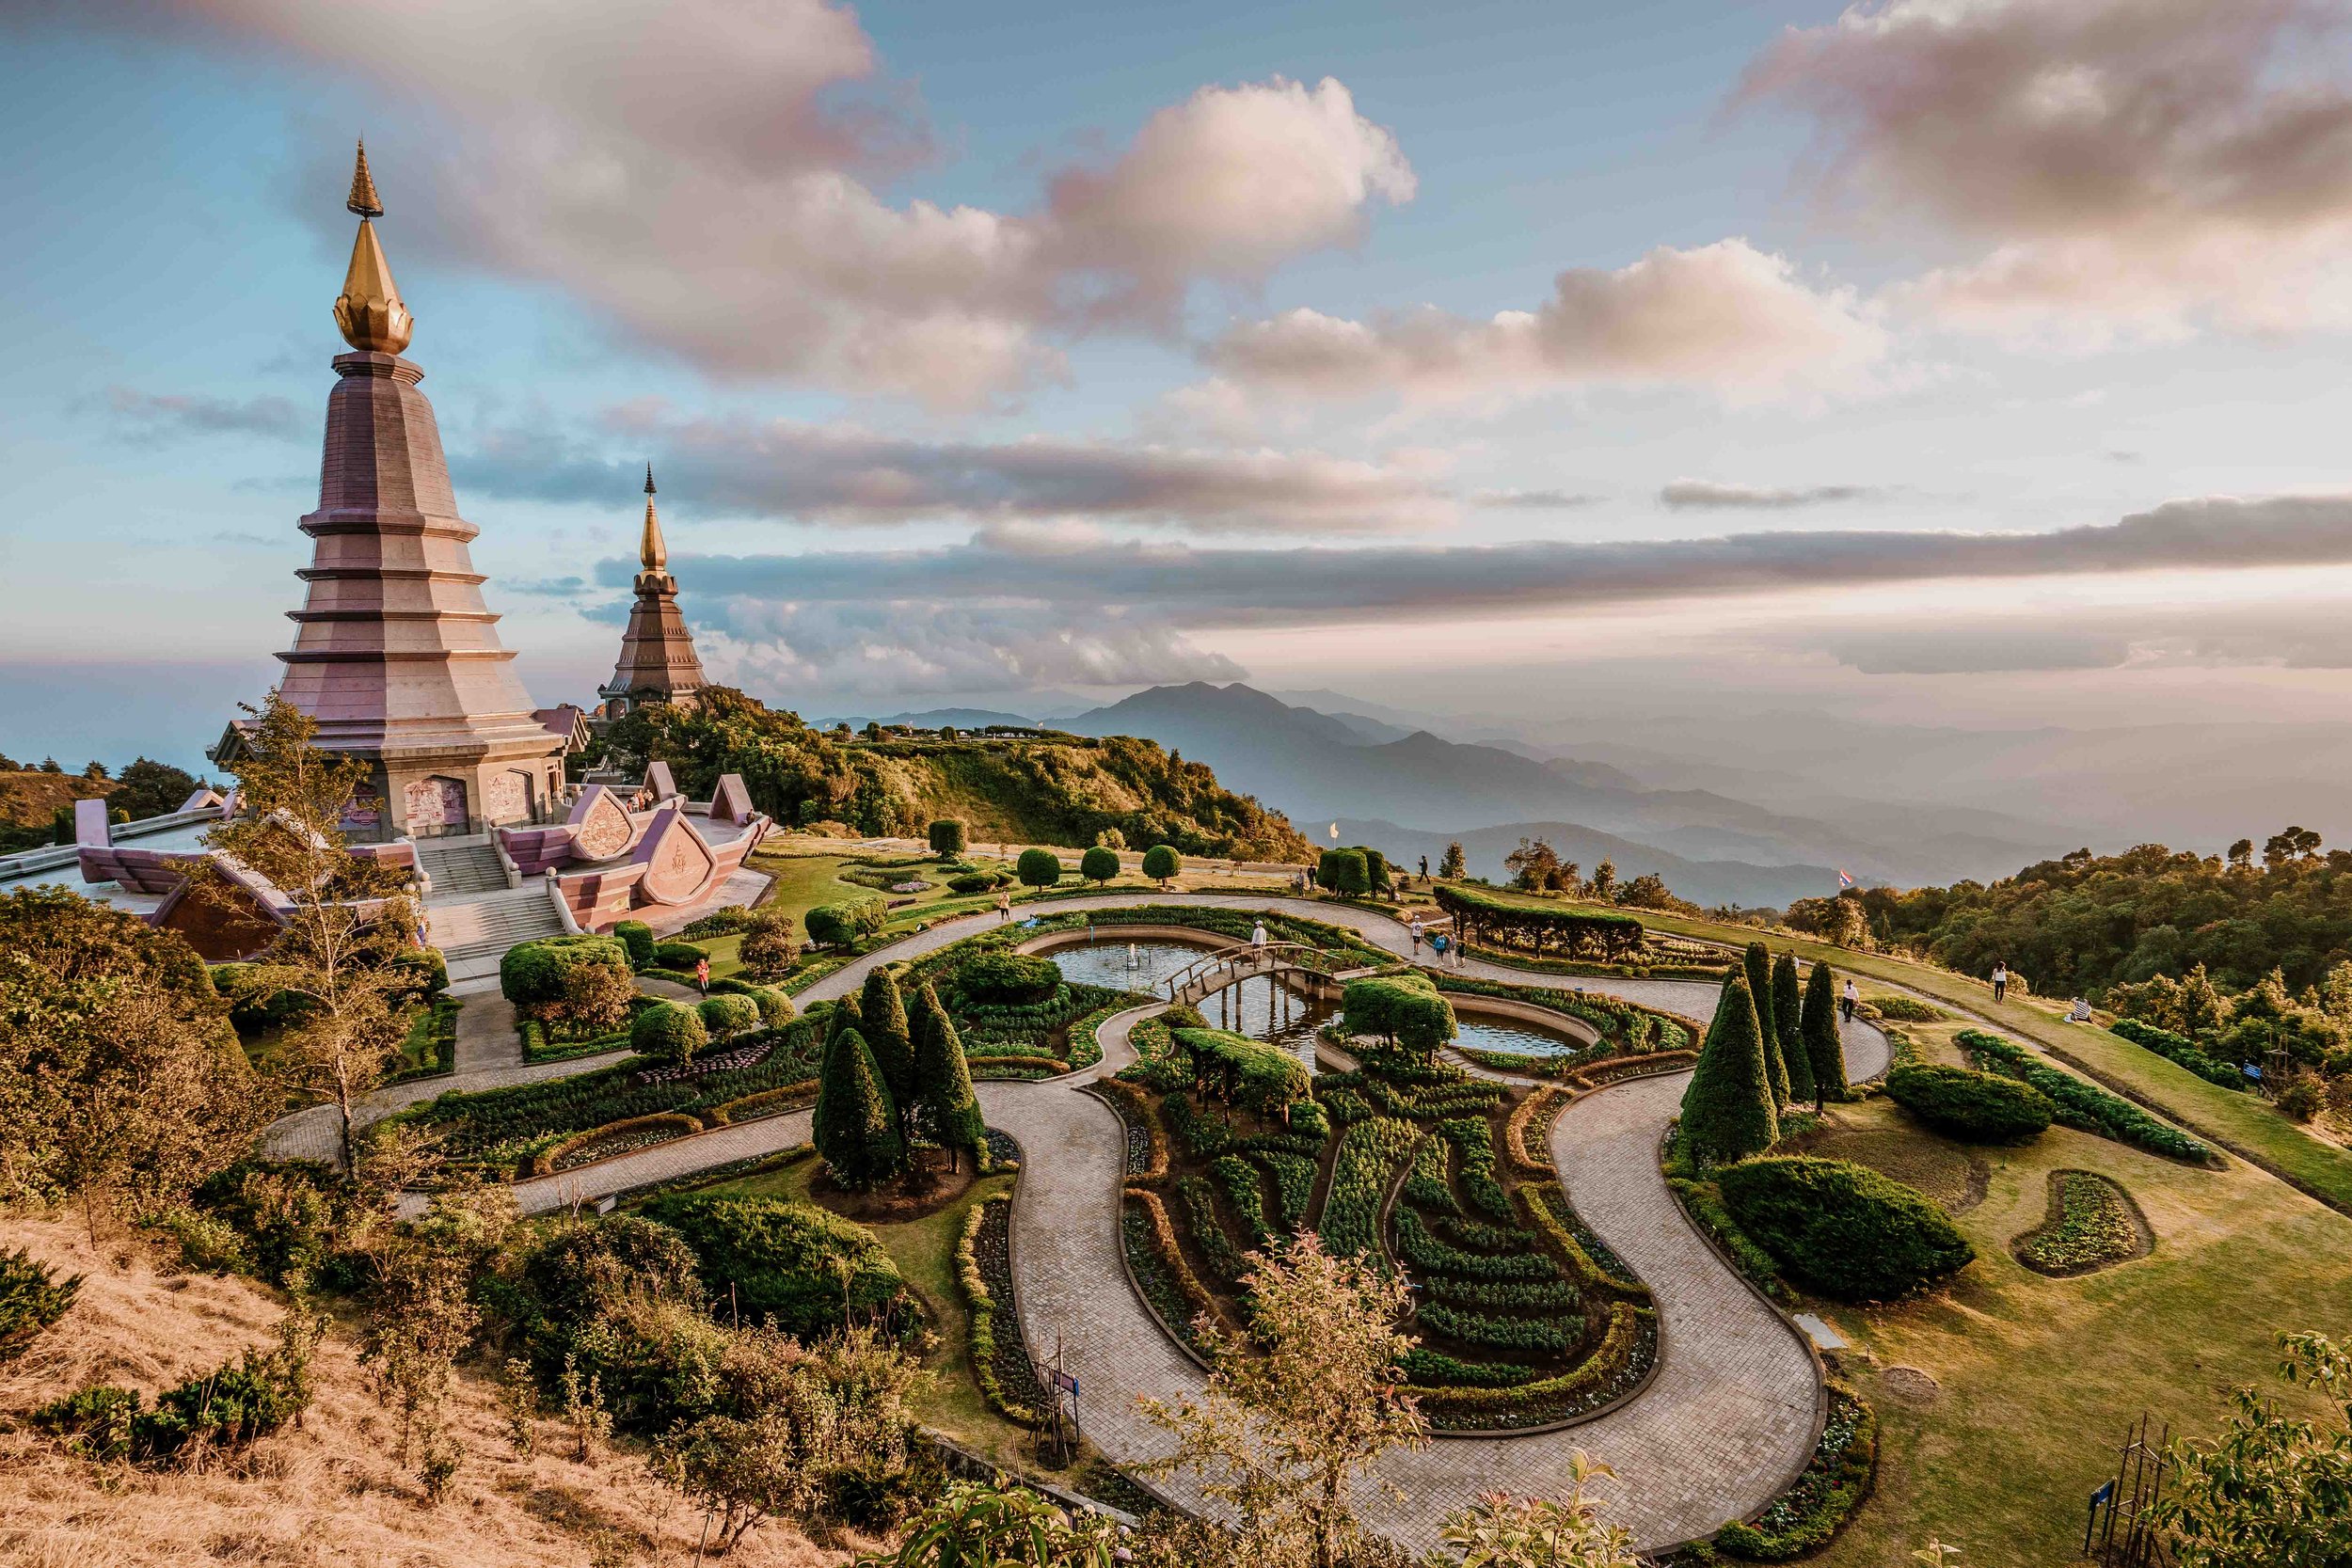 Landscape of Two Pagodas at Doi Inthanon in Chiang Mai on 1 month Thailand travel itinerary